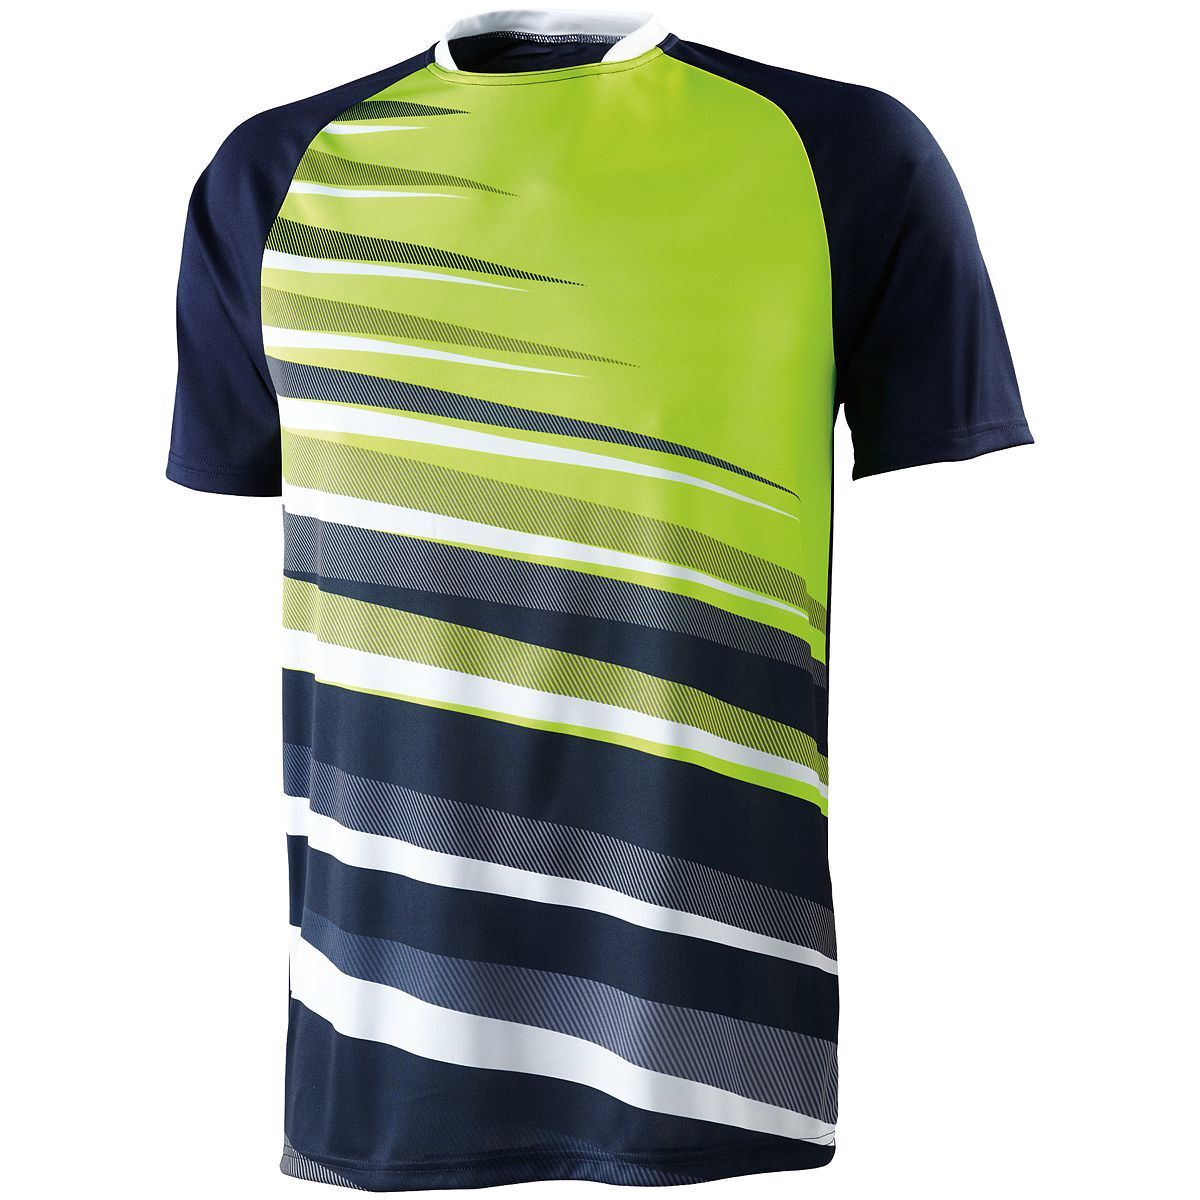 High 5 Adult Galactic Jersey in Navy/White/Lime  -Part of the Adult, Adult-Jersey, High5-Products, Soccer, Shirts, All-Sports-1 product lines at KanaleyCreations.com